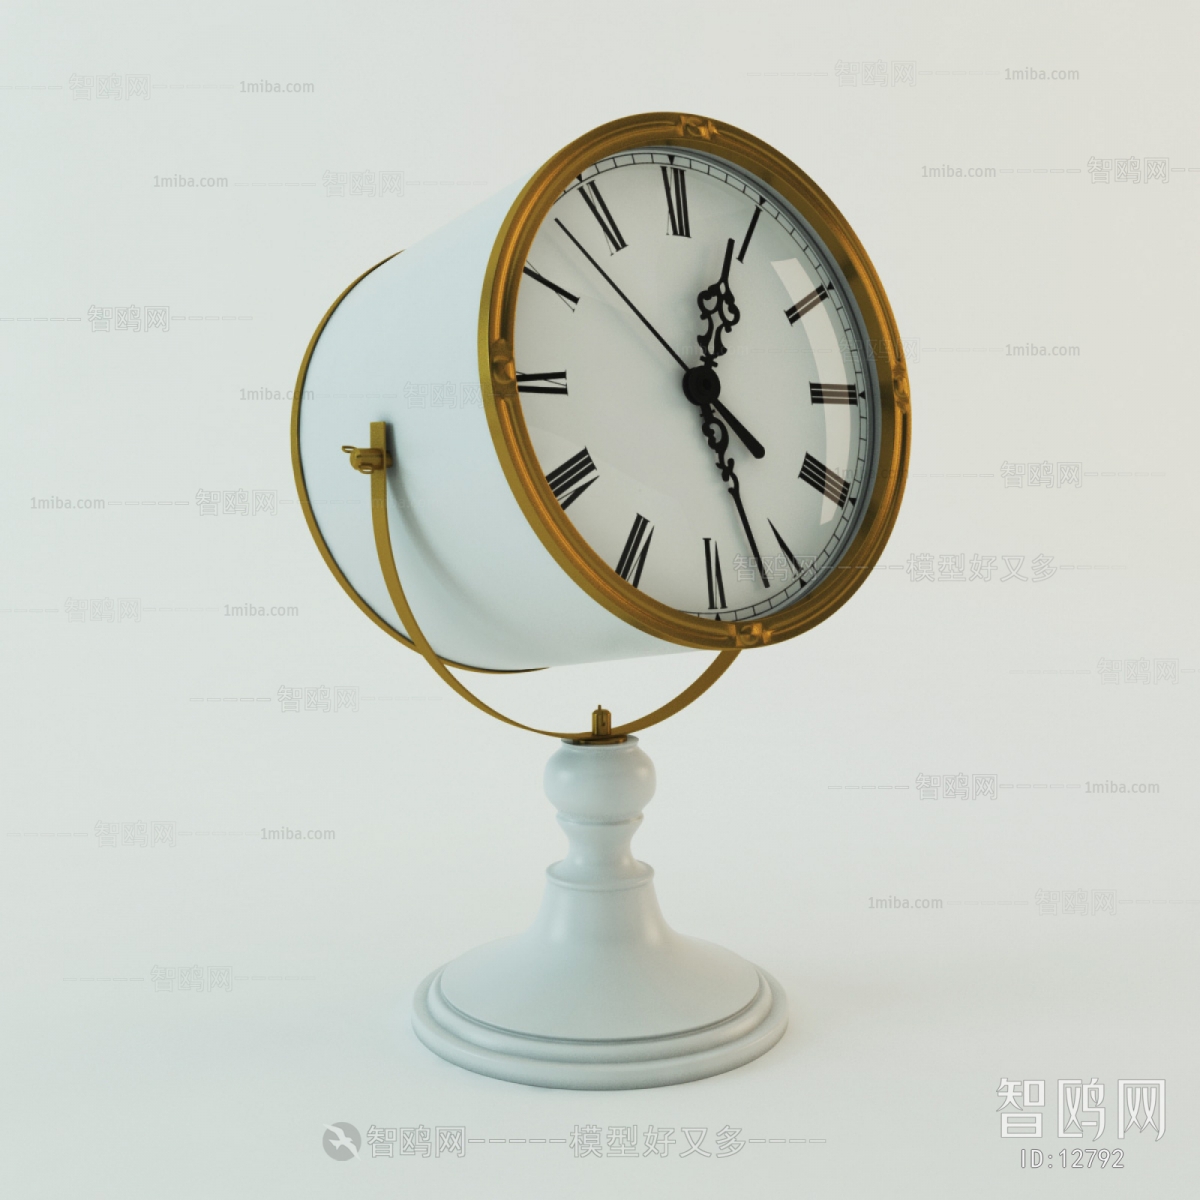 Modern European Style Clocks And Watches